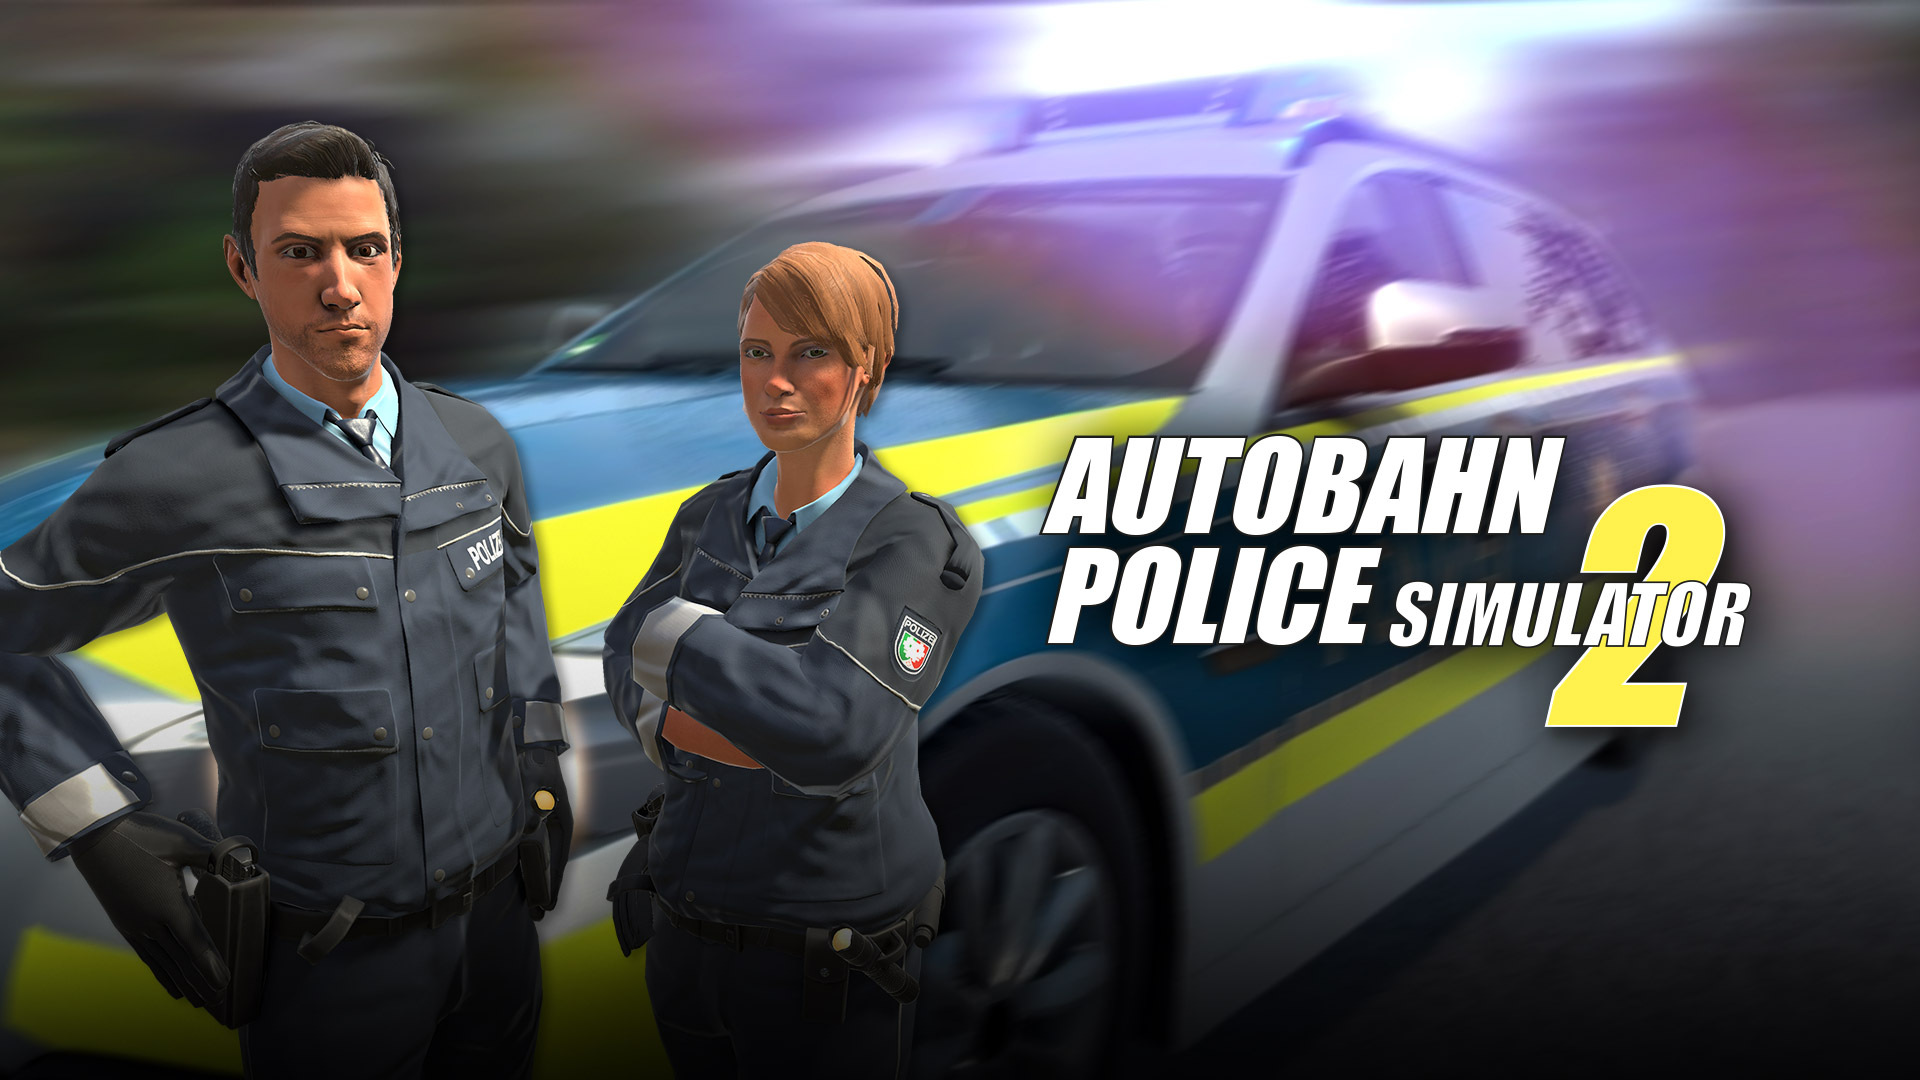 Autobahn Police Simulator 2, Germany’s #1 selling physical game on the PlayStation 4, has been dispatched to PS4s in North America